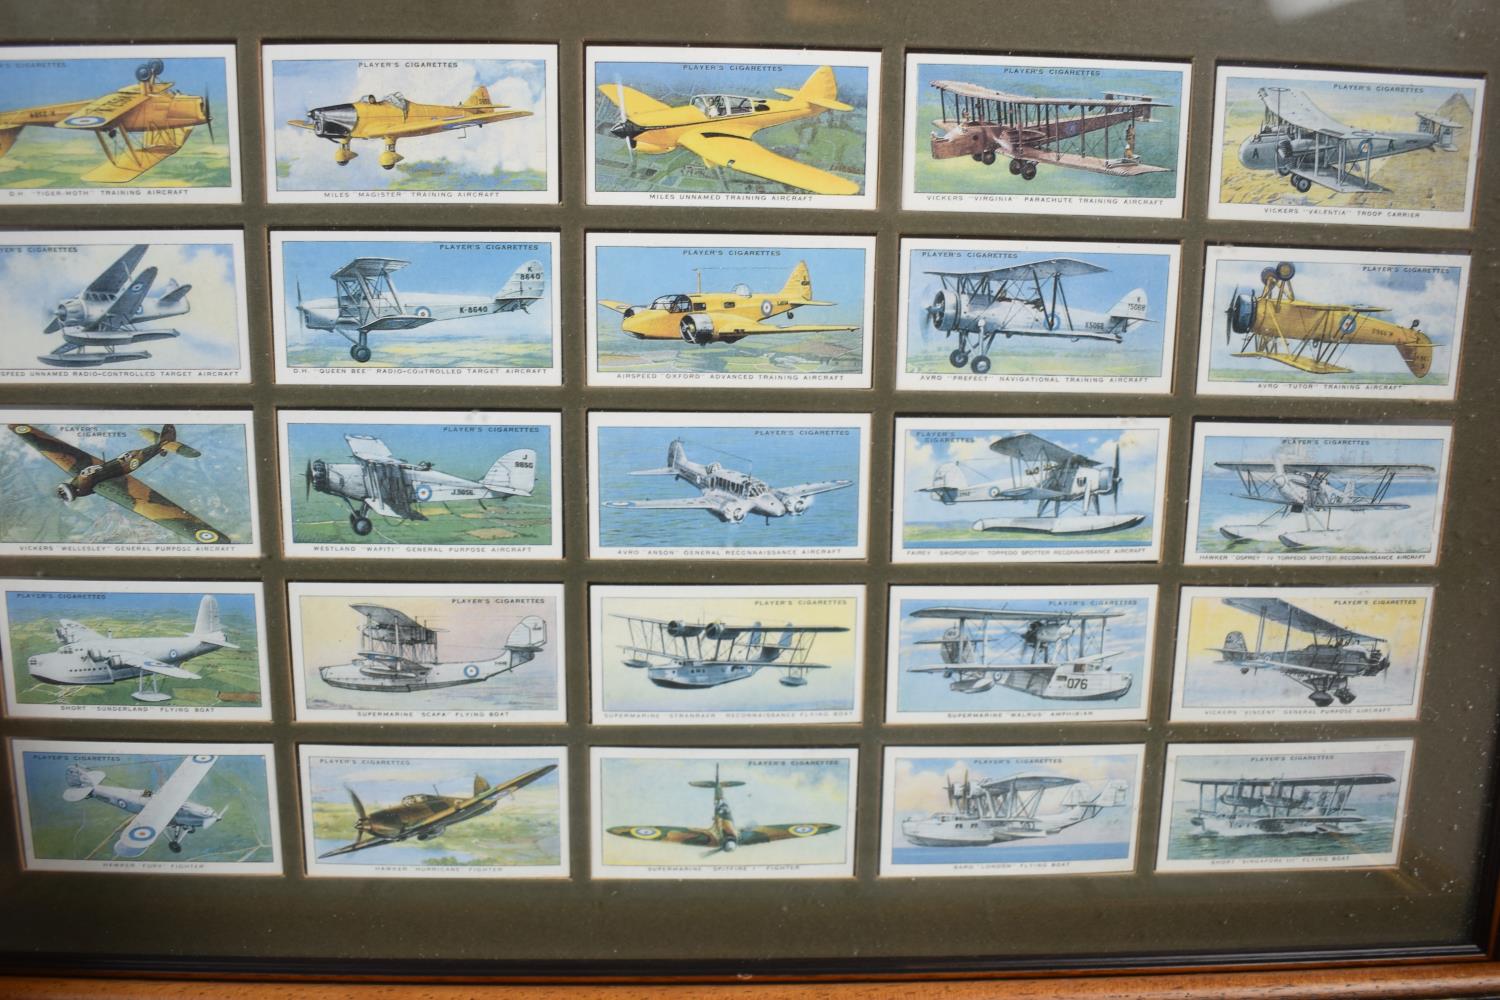 Two Sets of Framed Cigarette Cards, Vintage and WWII Planes - Image 2 of 3